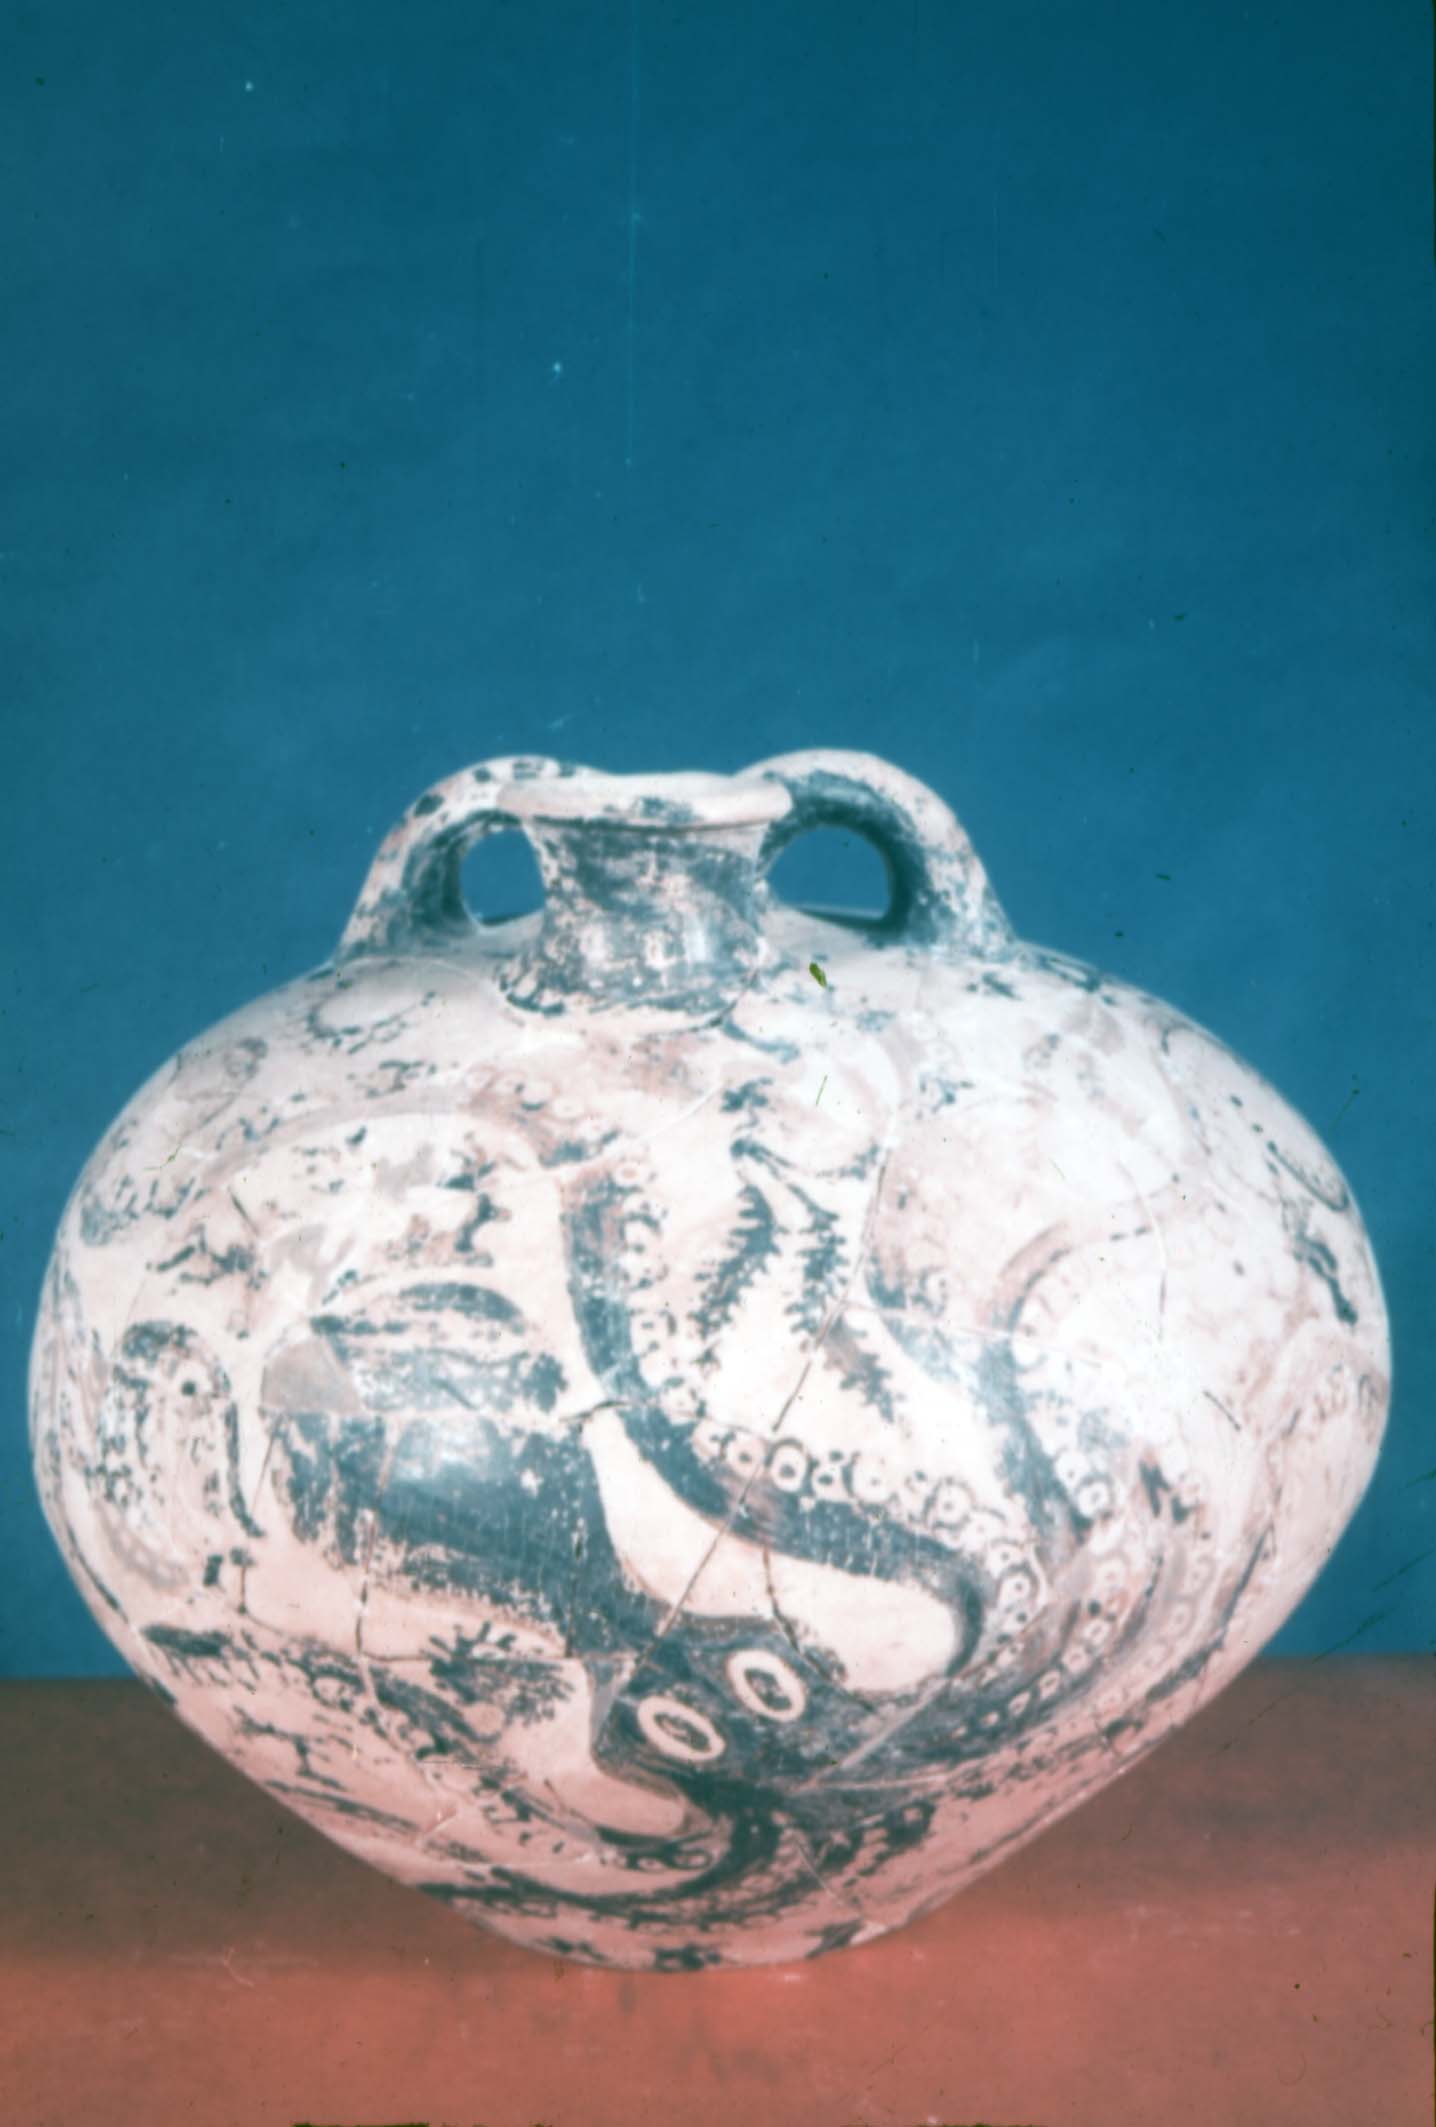 Marine Style Pilgrim's Flask, Commonly known as the Octopus Vase